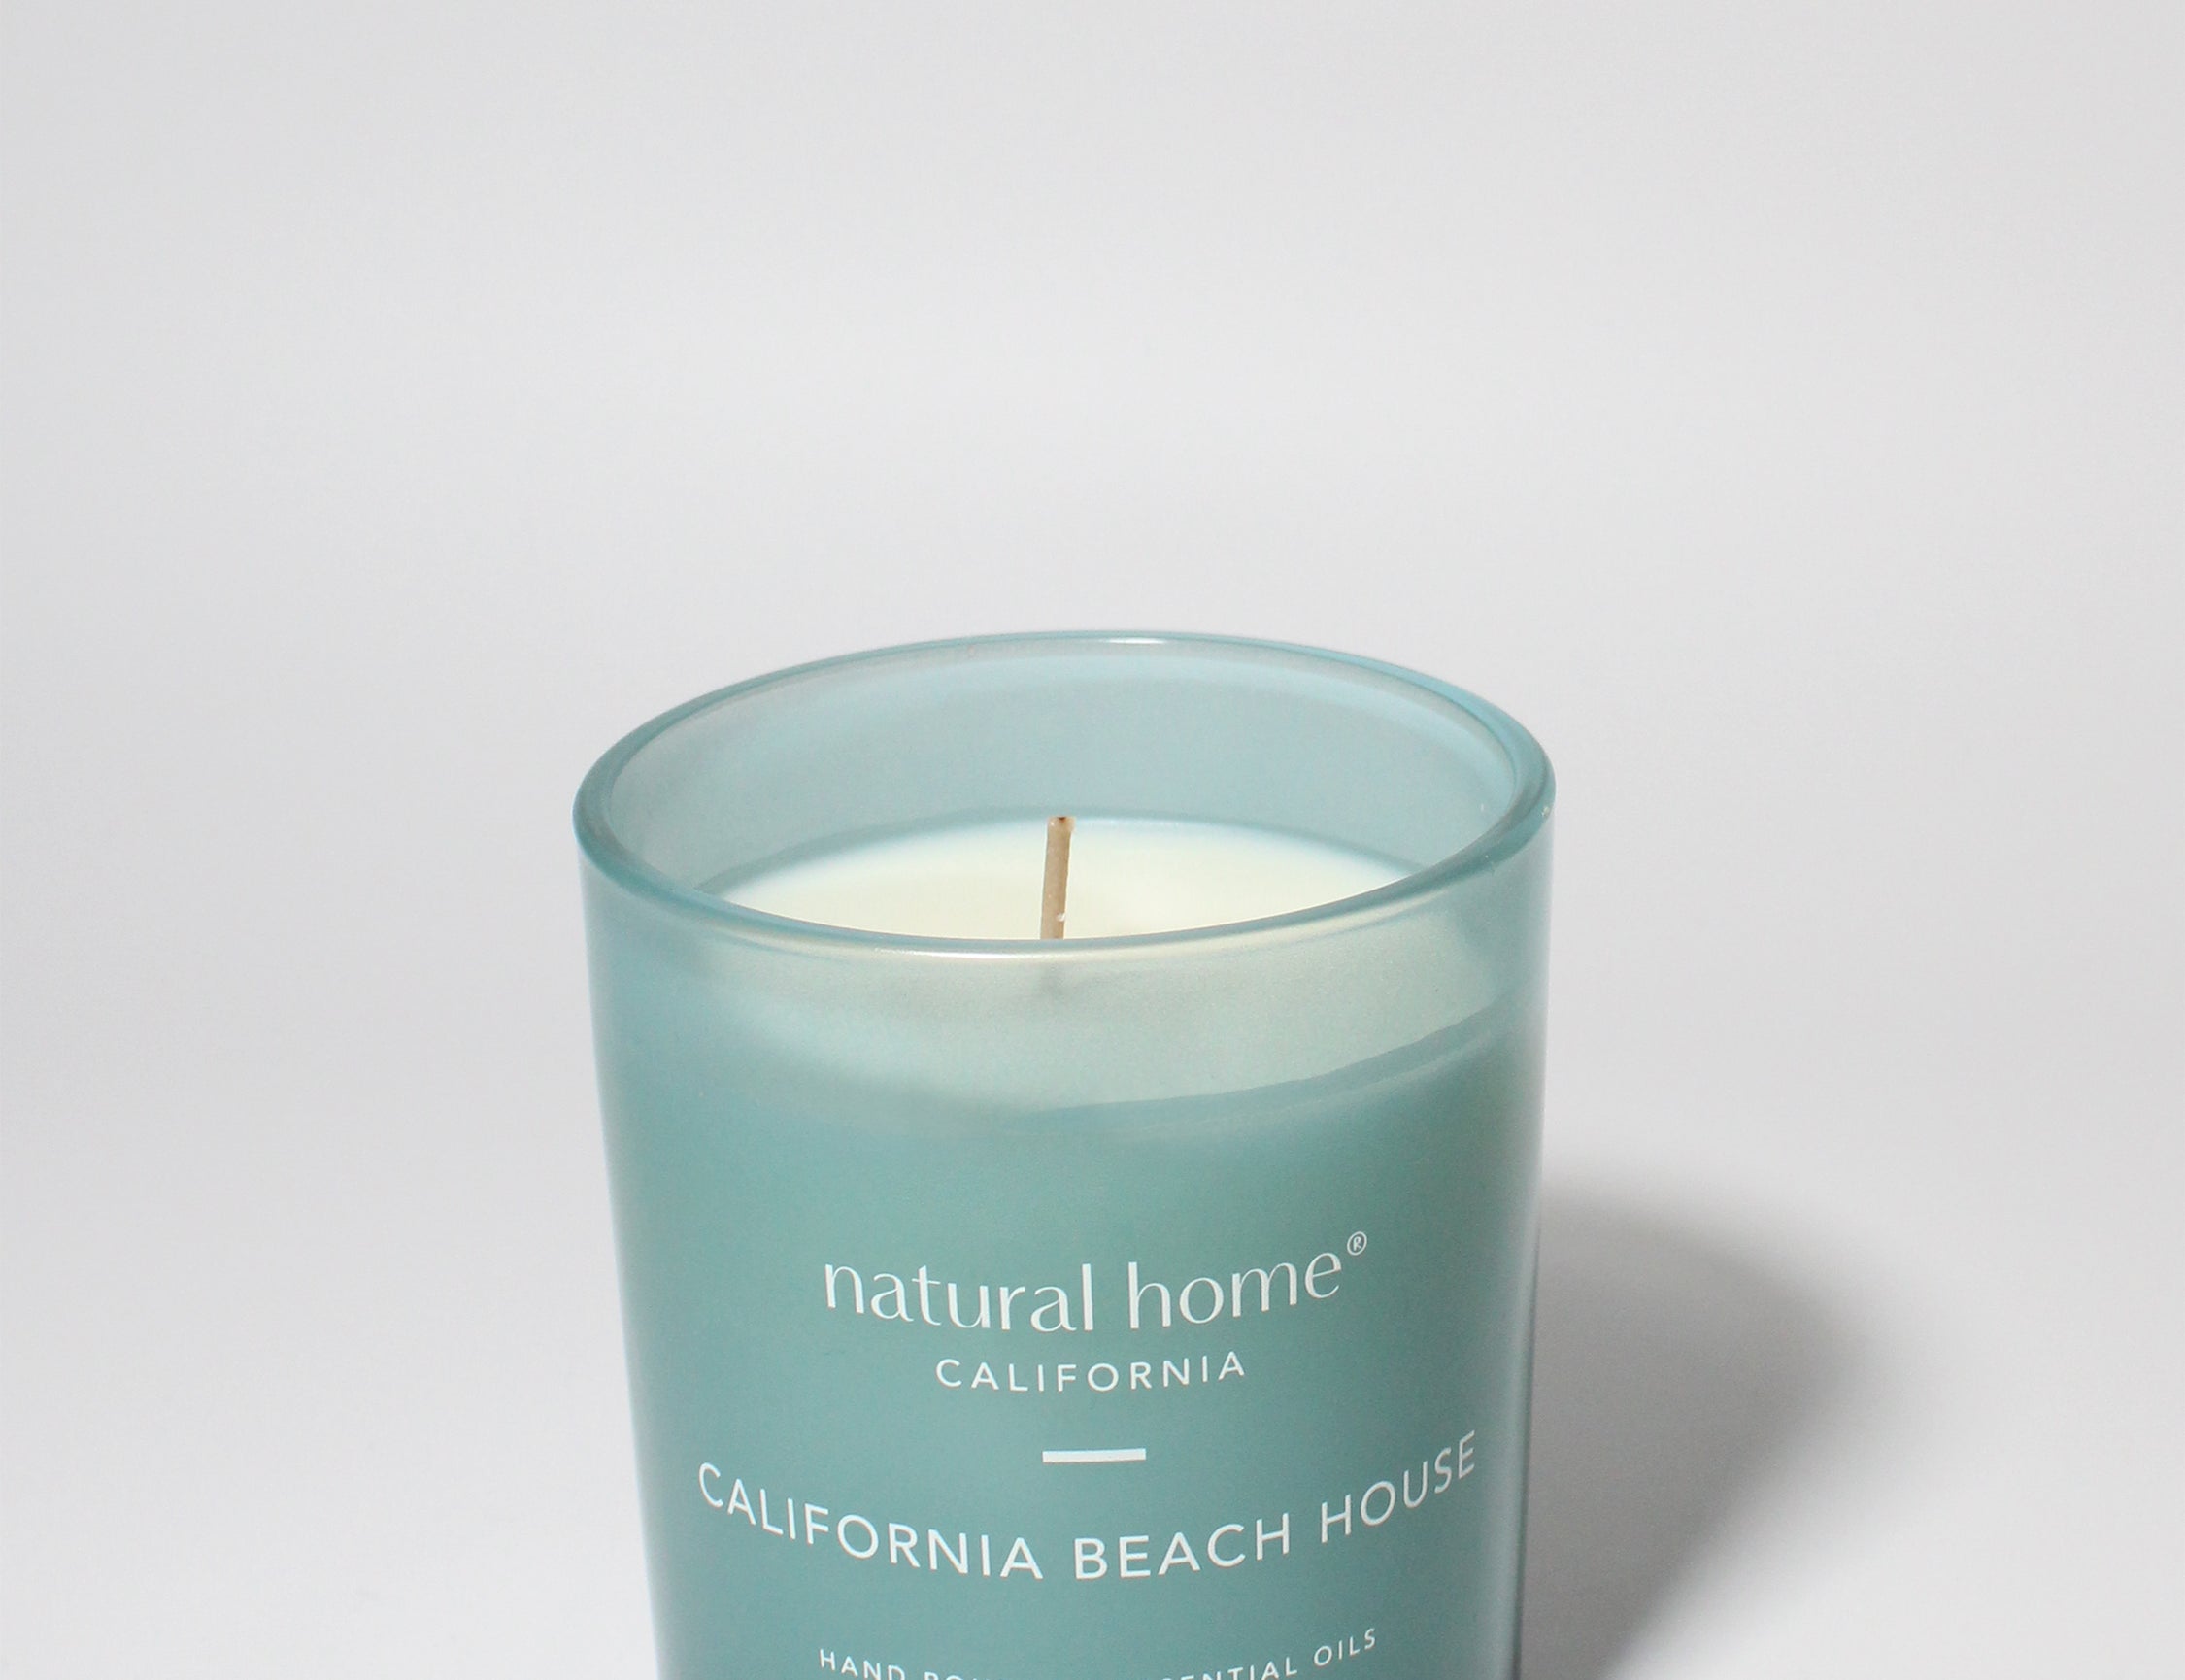 California Beach House Natural Home 11.5 oz scented candle Green vessel with solid metal lid